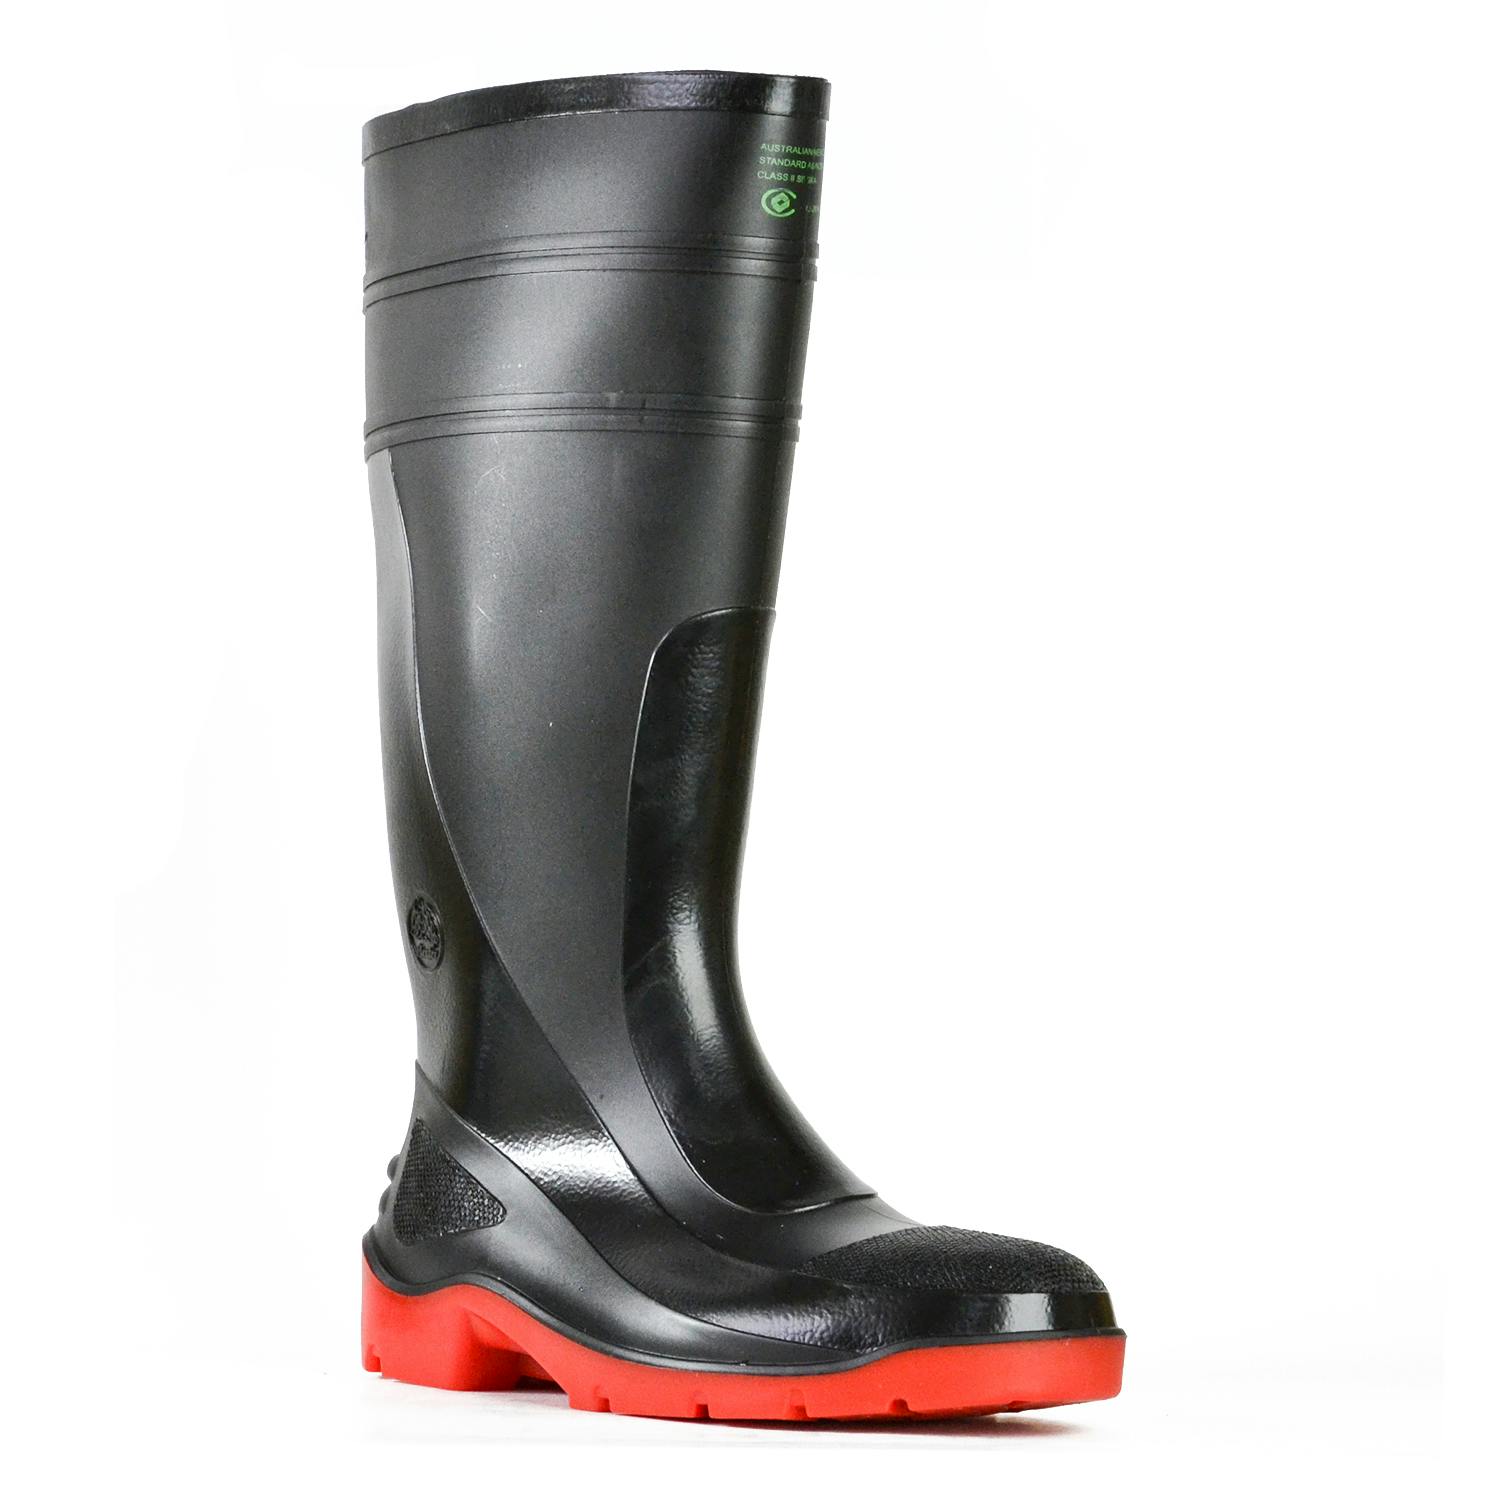 Bata Industrials Utility-ST - Black / Red PVC 400Mm Safety Toe Boot (PVC Utility)